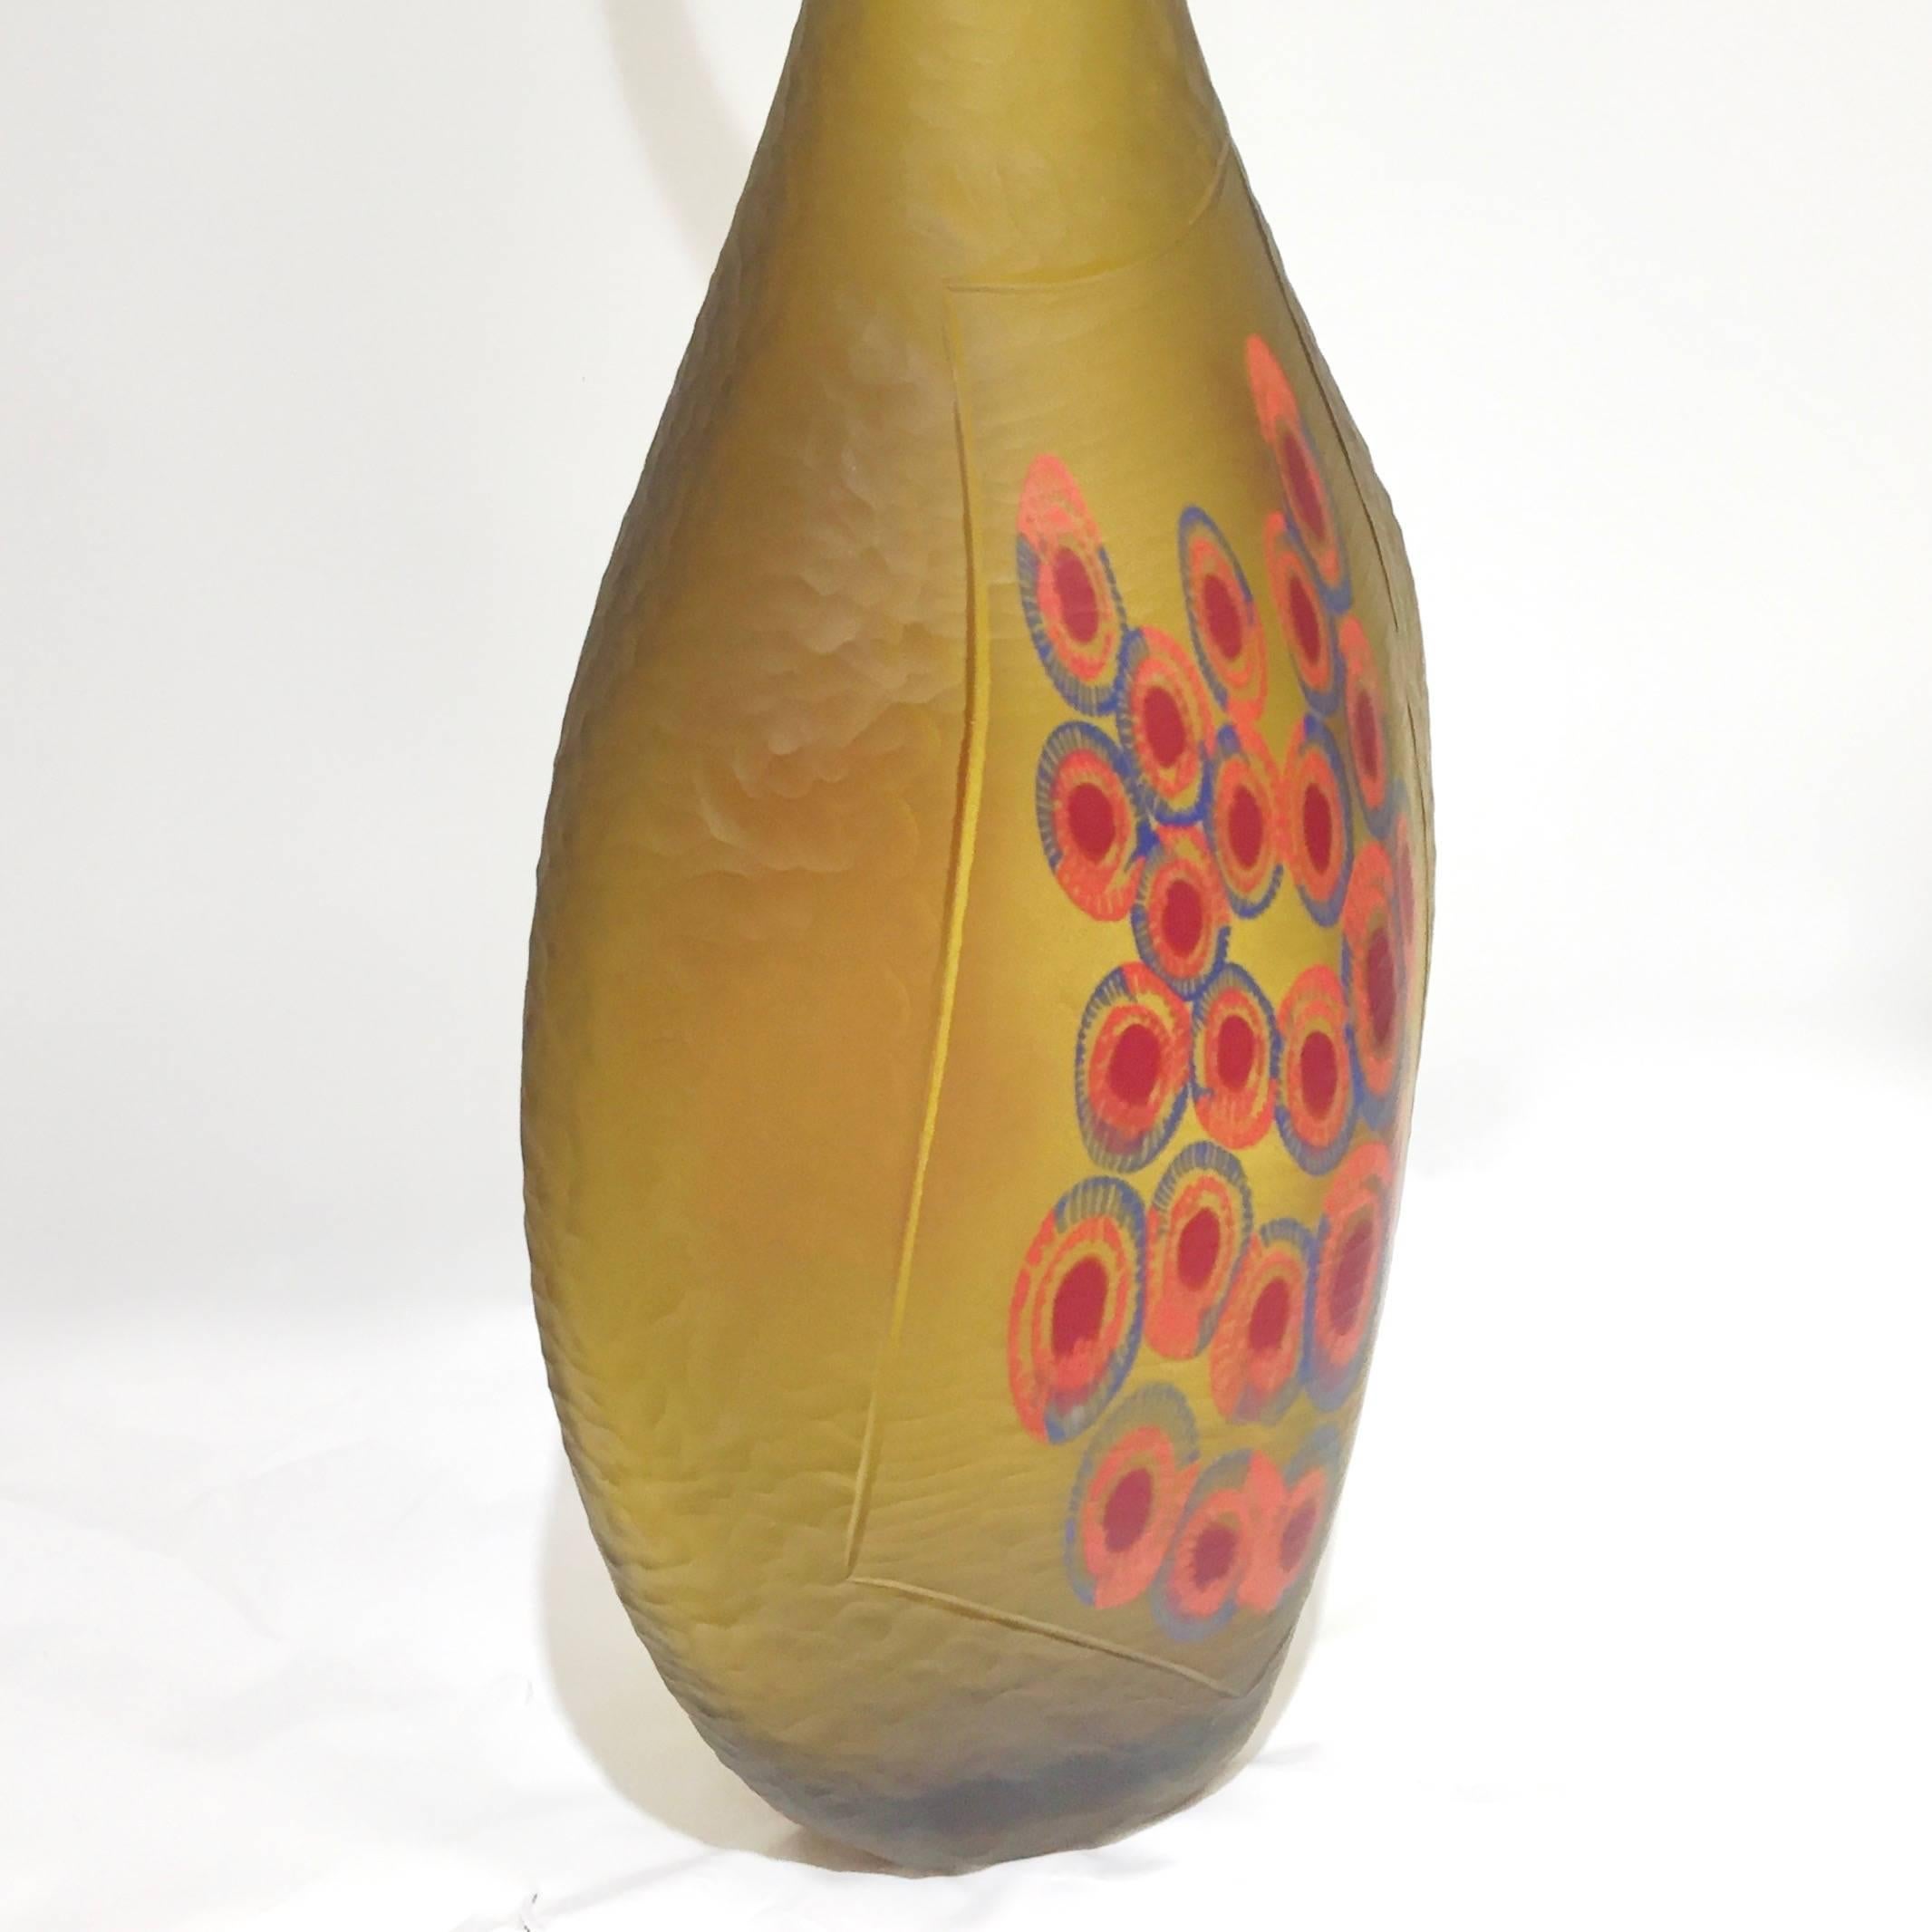 Blown Glass Dona Modern Art Glass Yellow Amber Sculpture Vase with Red and Blue Murrine